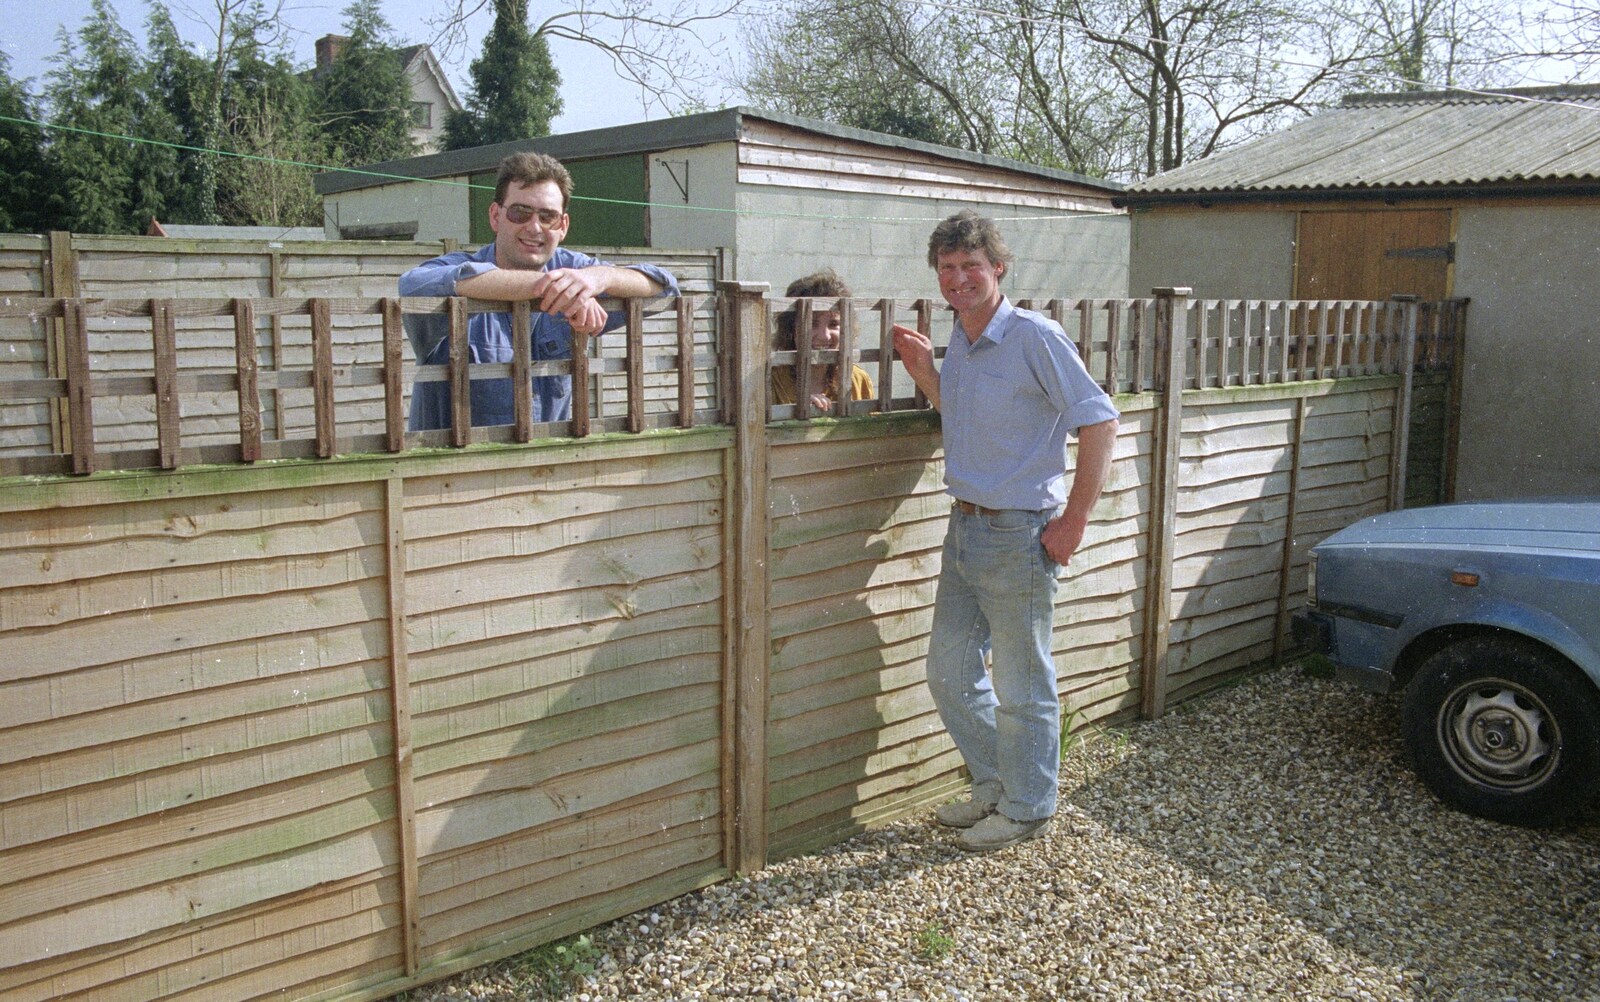 Steve and Sam chat to Geoff over the fence from Kenny's Nibbles, St. Paul's and Sean's, Farnborough, London and Diss - 19th March 1990